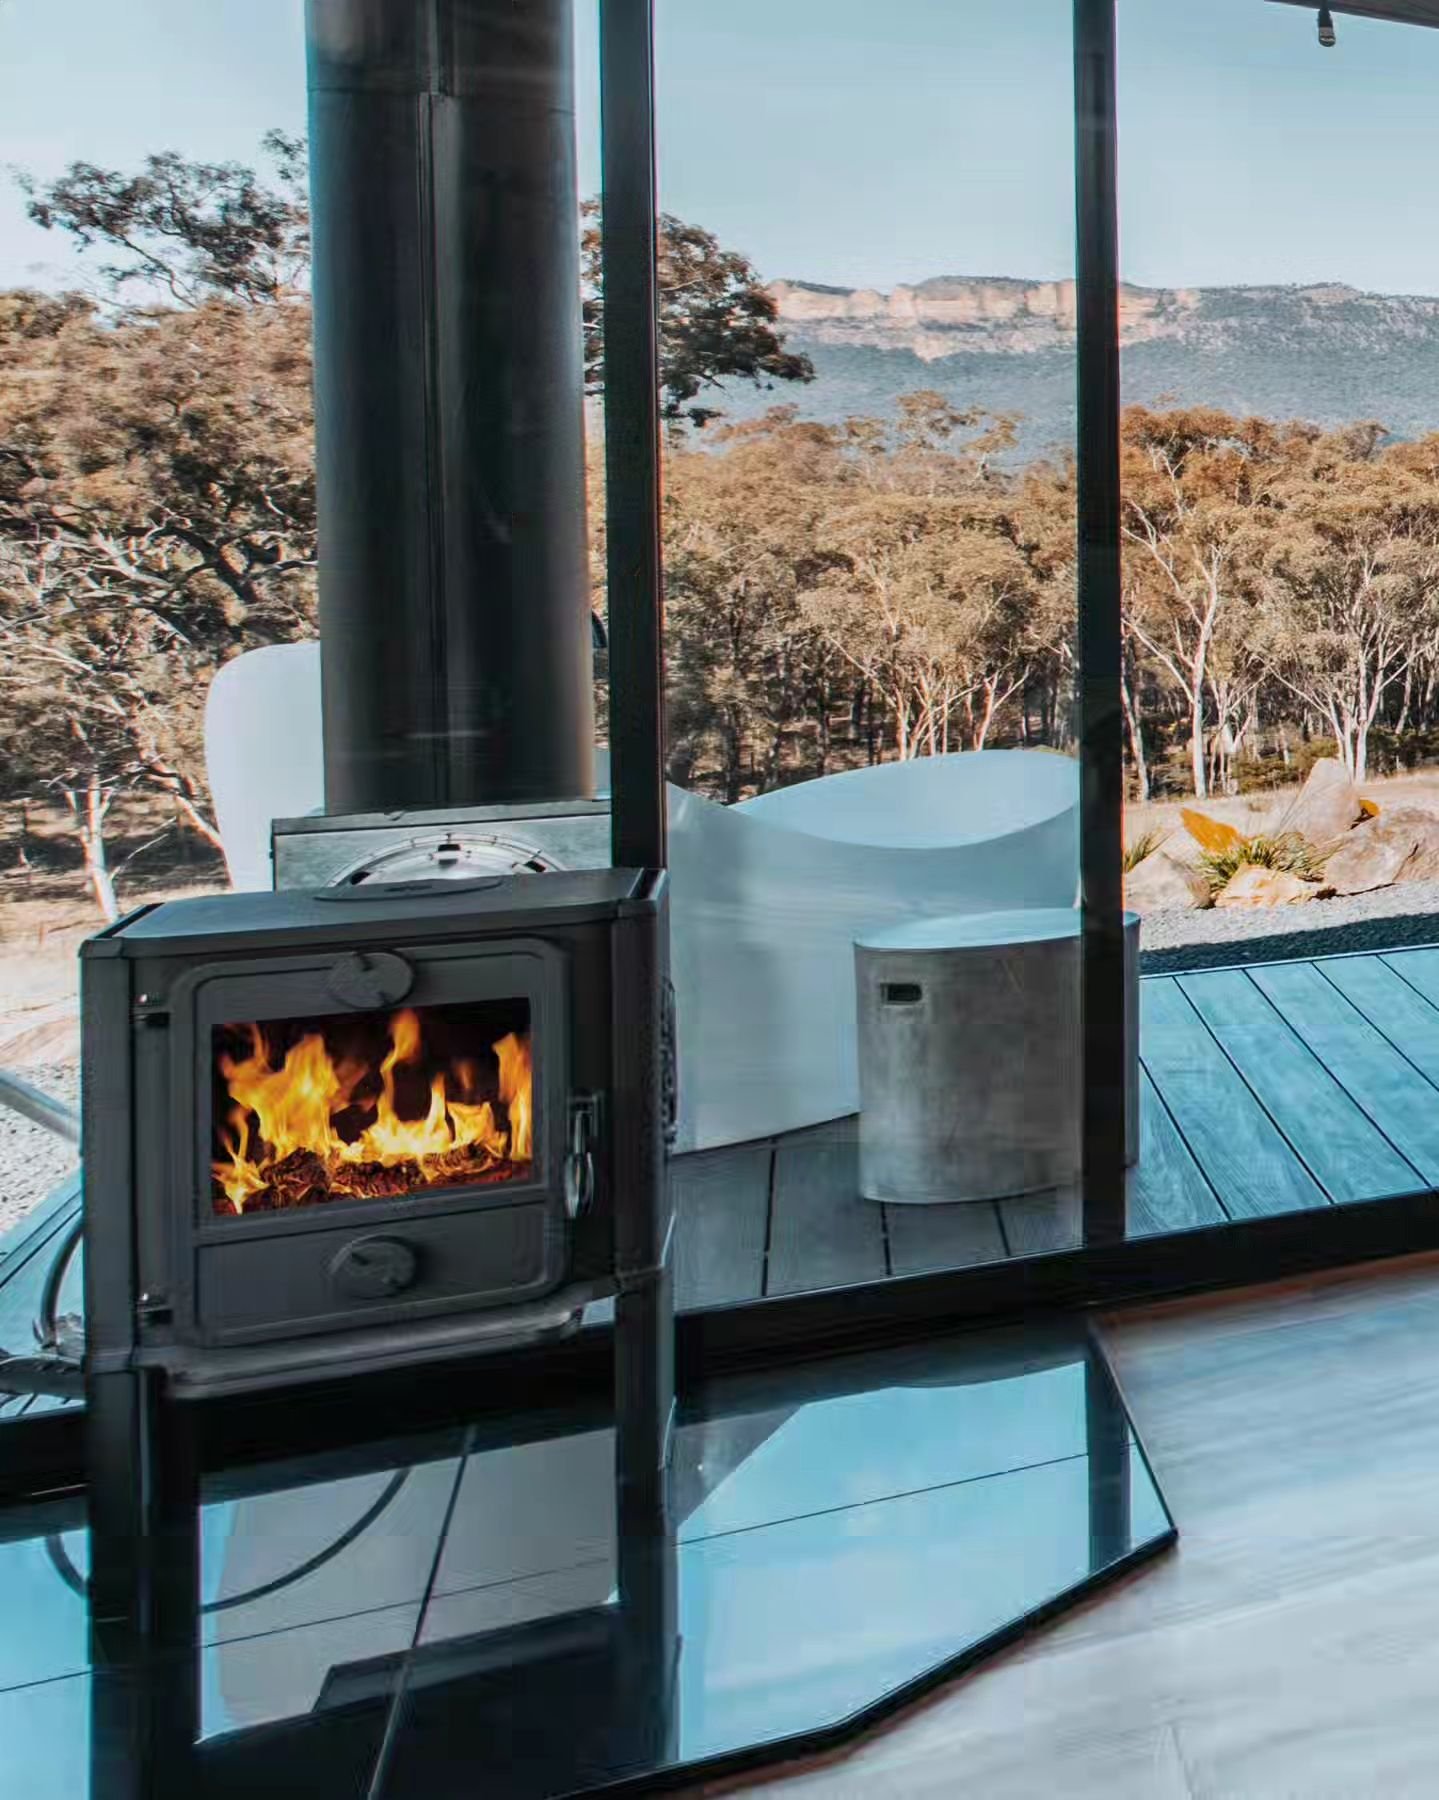 Craving a getaway that's equal parts adventure and indulgence? ️We've got you covered!

#CaperteeValley #NatureRetreat #RuggedLuxury #GlampingGetaway #RelaxAndReconnect #OutdoorEscapes #RuggedandRefined #VisitNSW #VisitMudgee #MudgeeRegion #WildnestF